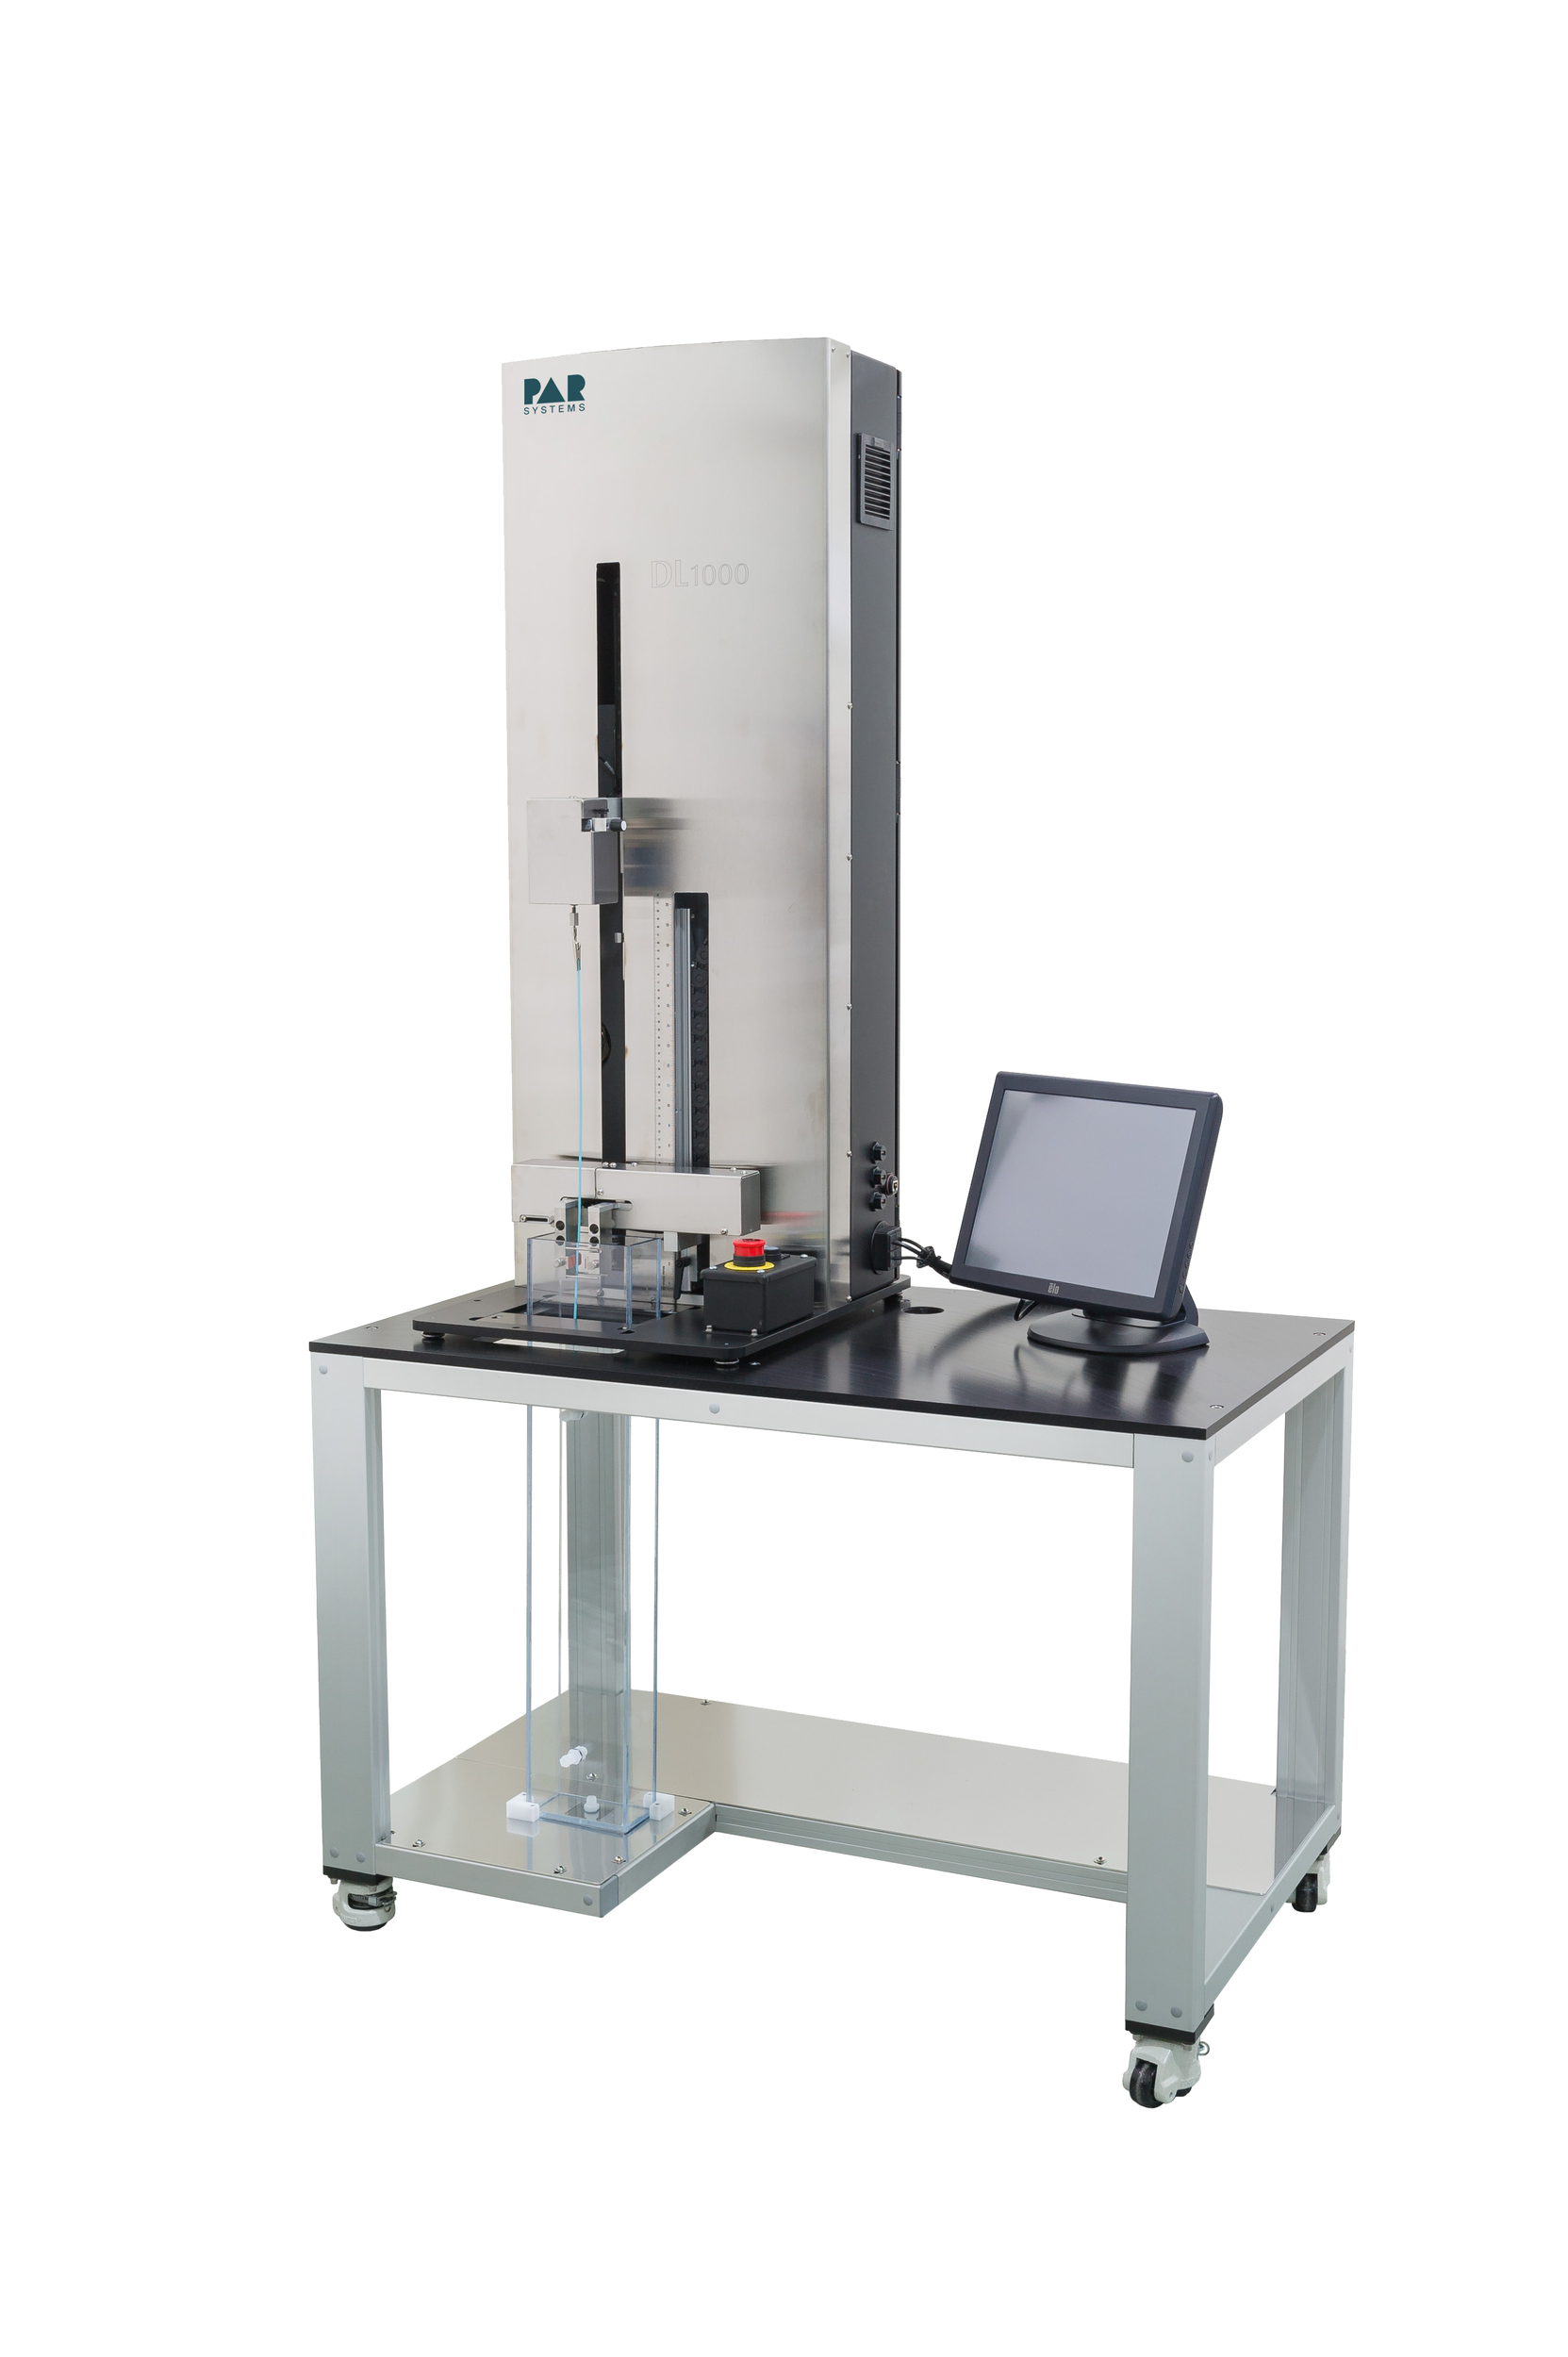 lubricity testing machine from PAR Systems